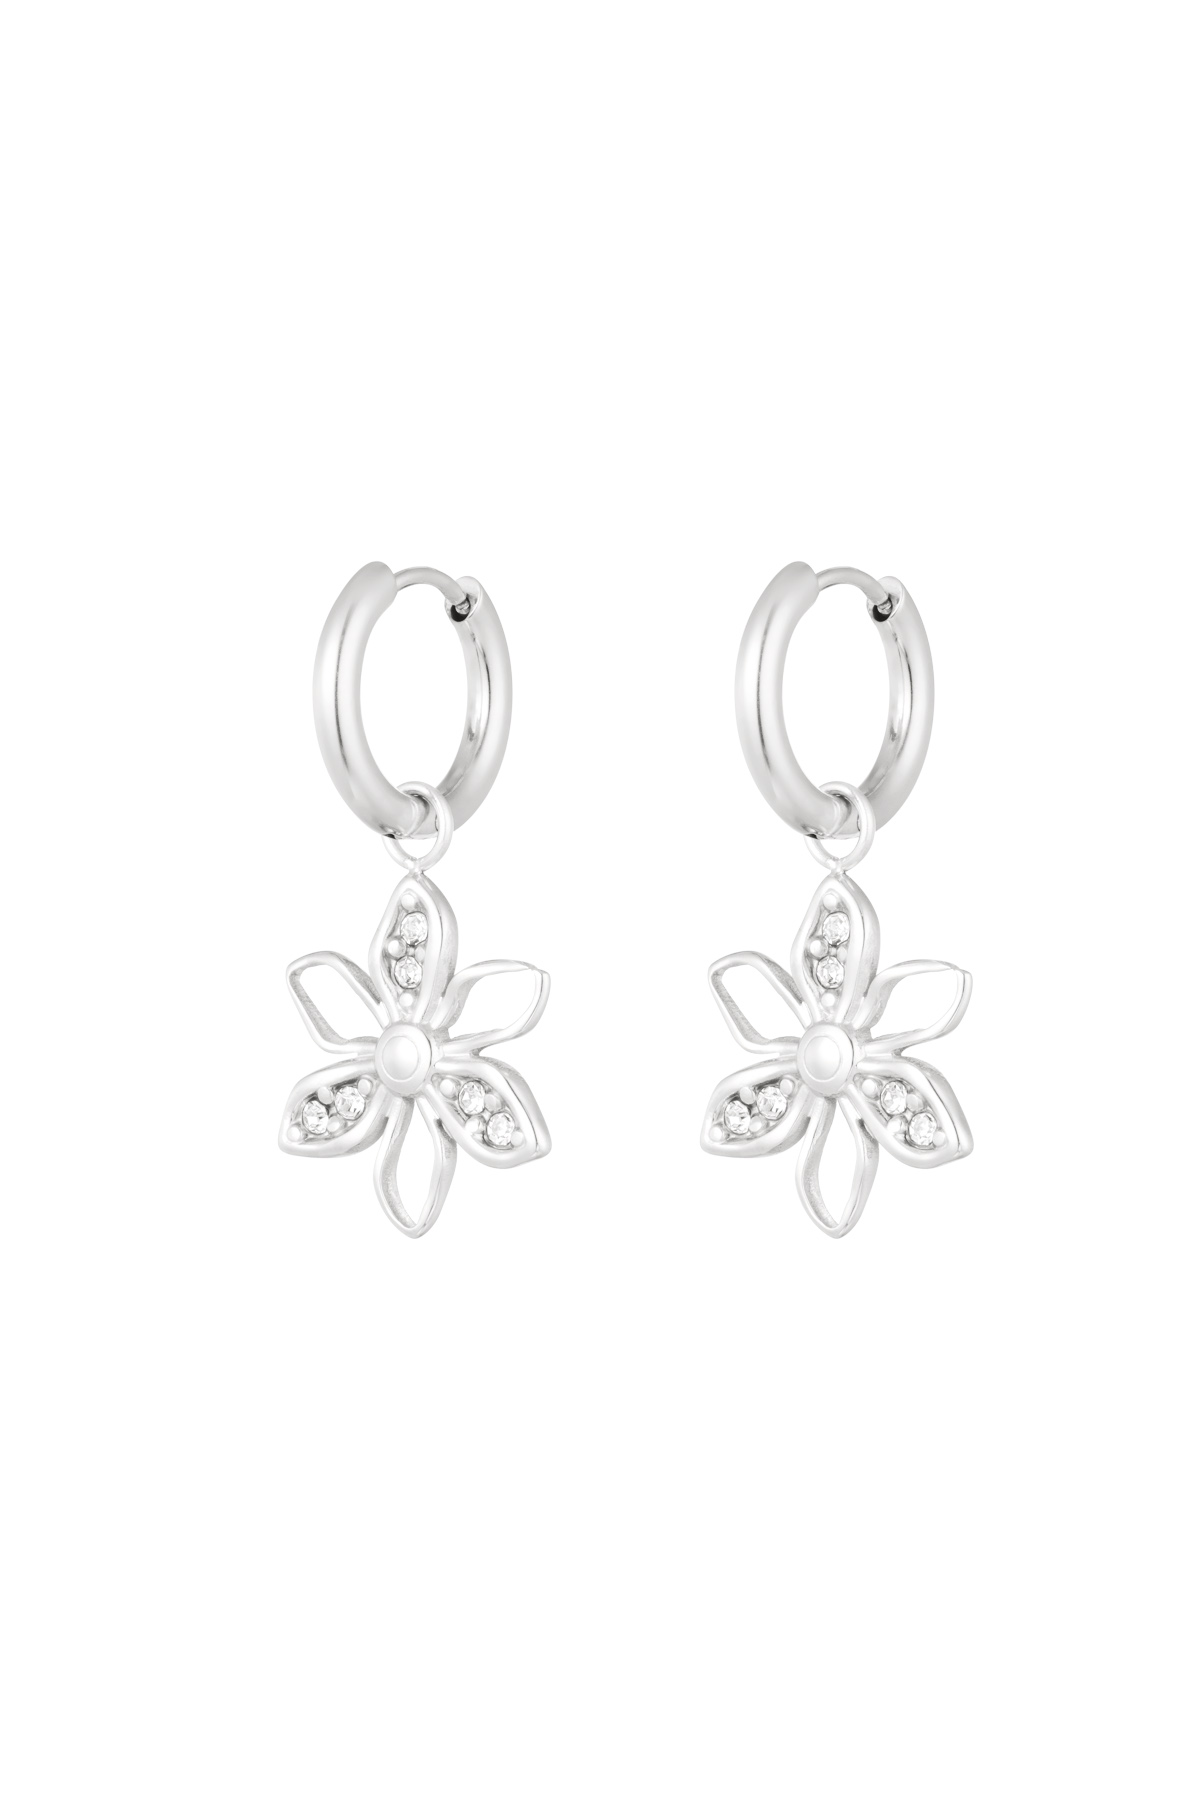 Earrings wild flower with stones - silver h5 